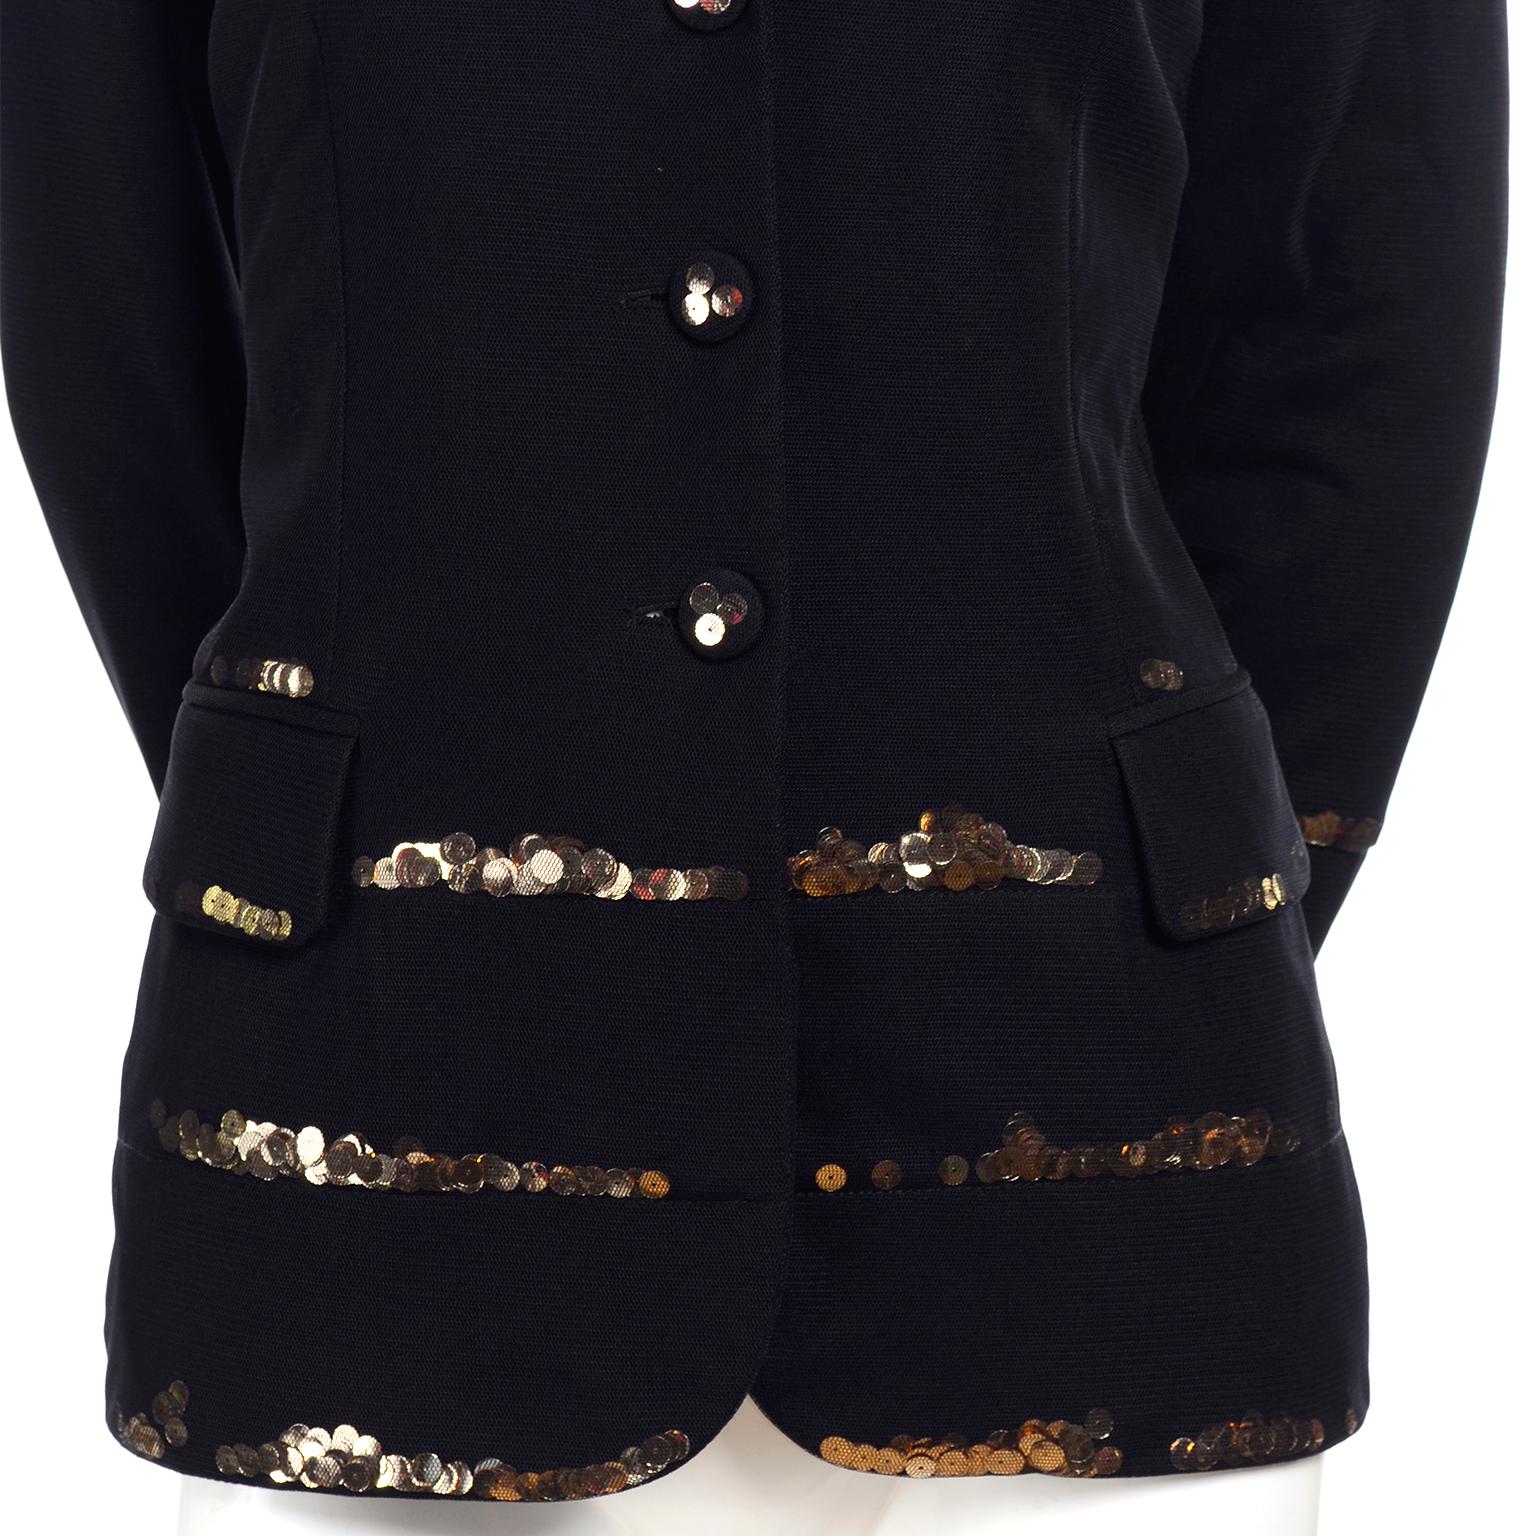 Vintage Moschino Black Blazer With Fine Netting and Gold Sequins 1